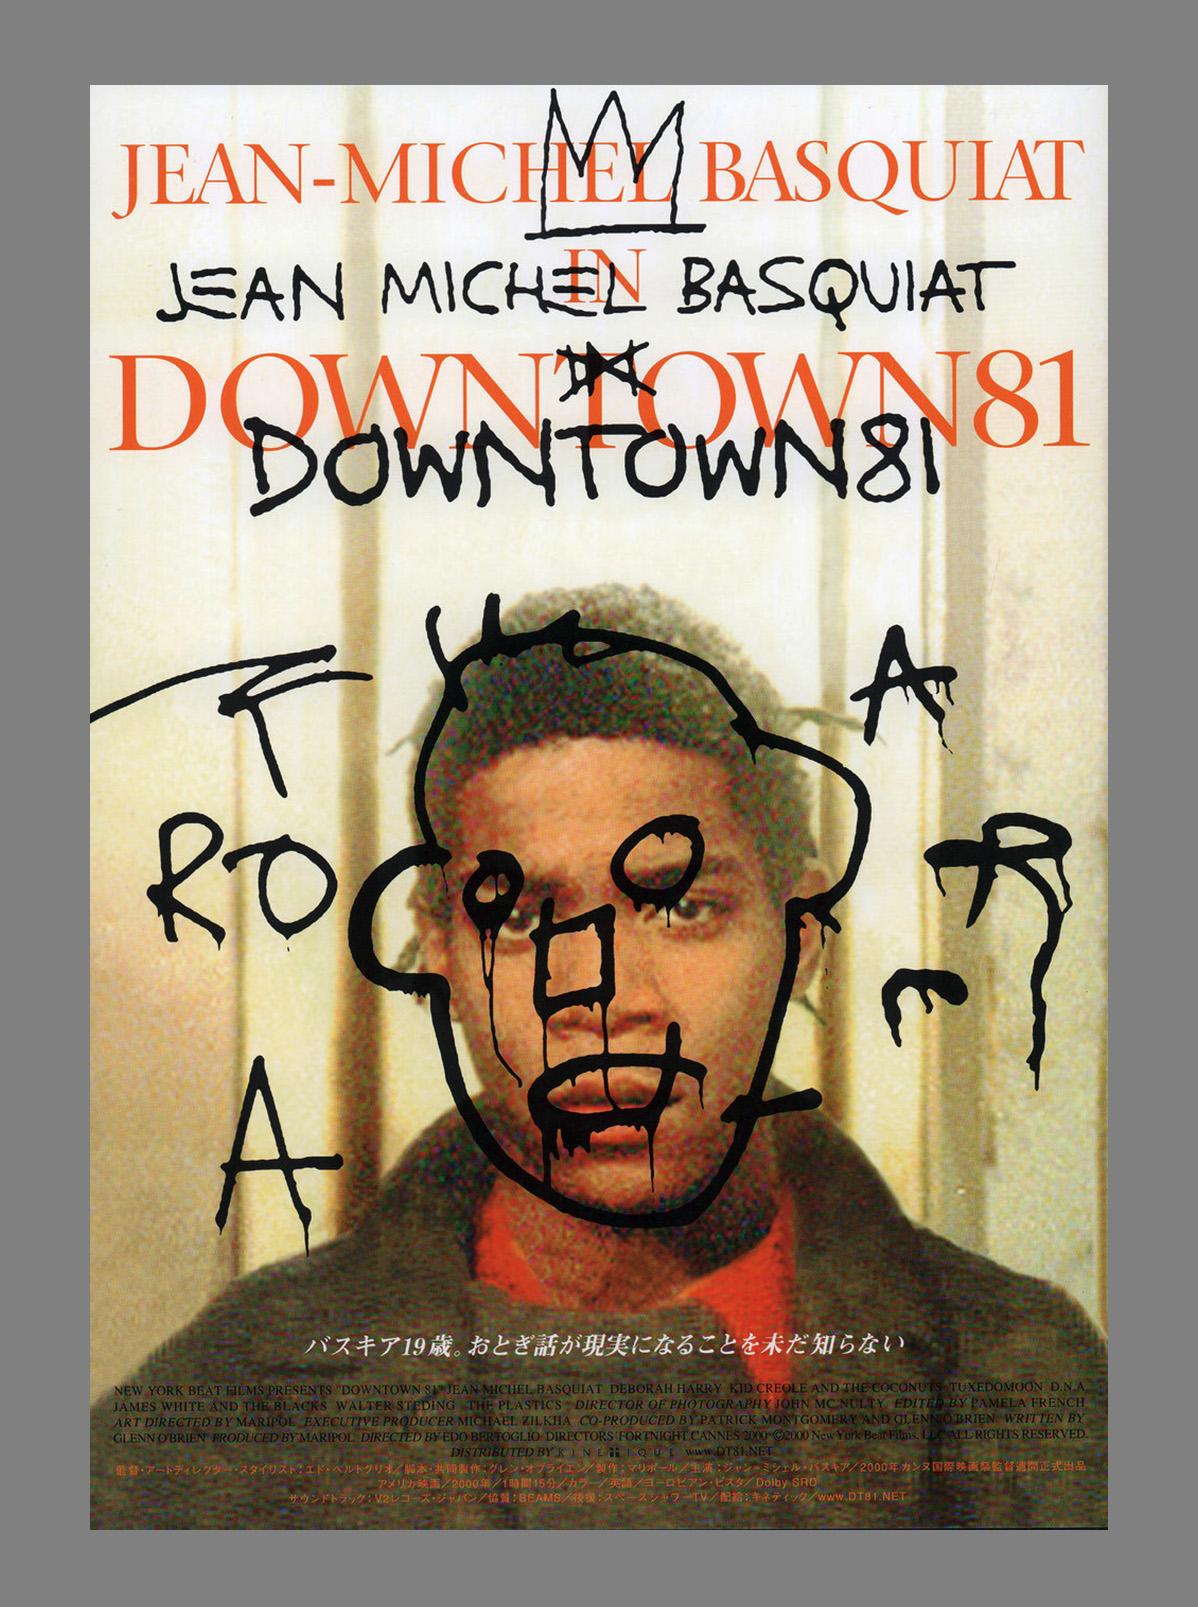 Basquiat Downtown 81 movie poster:
Vintage Japan promo poster, circa 2001 for the seminal Basquiat film, 'Downtown 81'.

Measures: 12 x 6 inches.
Minor signs of handling; otherwise very good to excellent condition.
Well-suited for